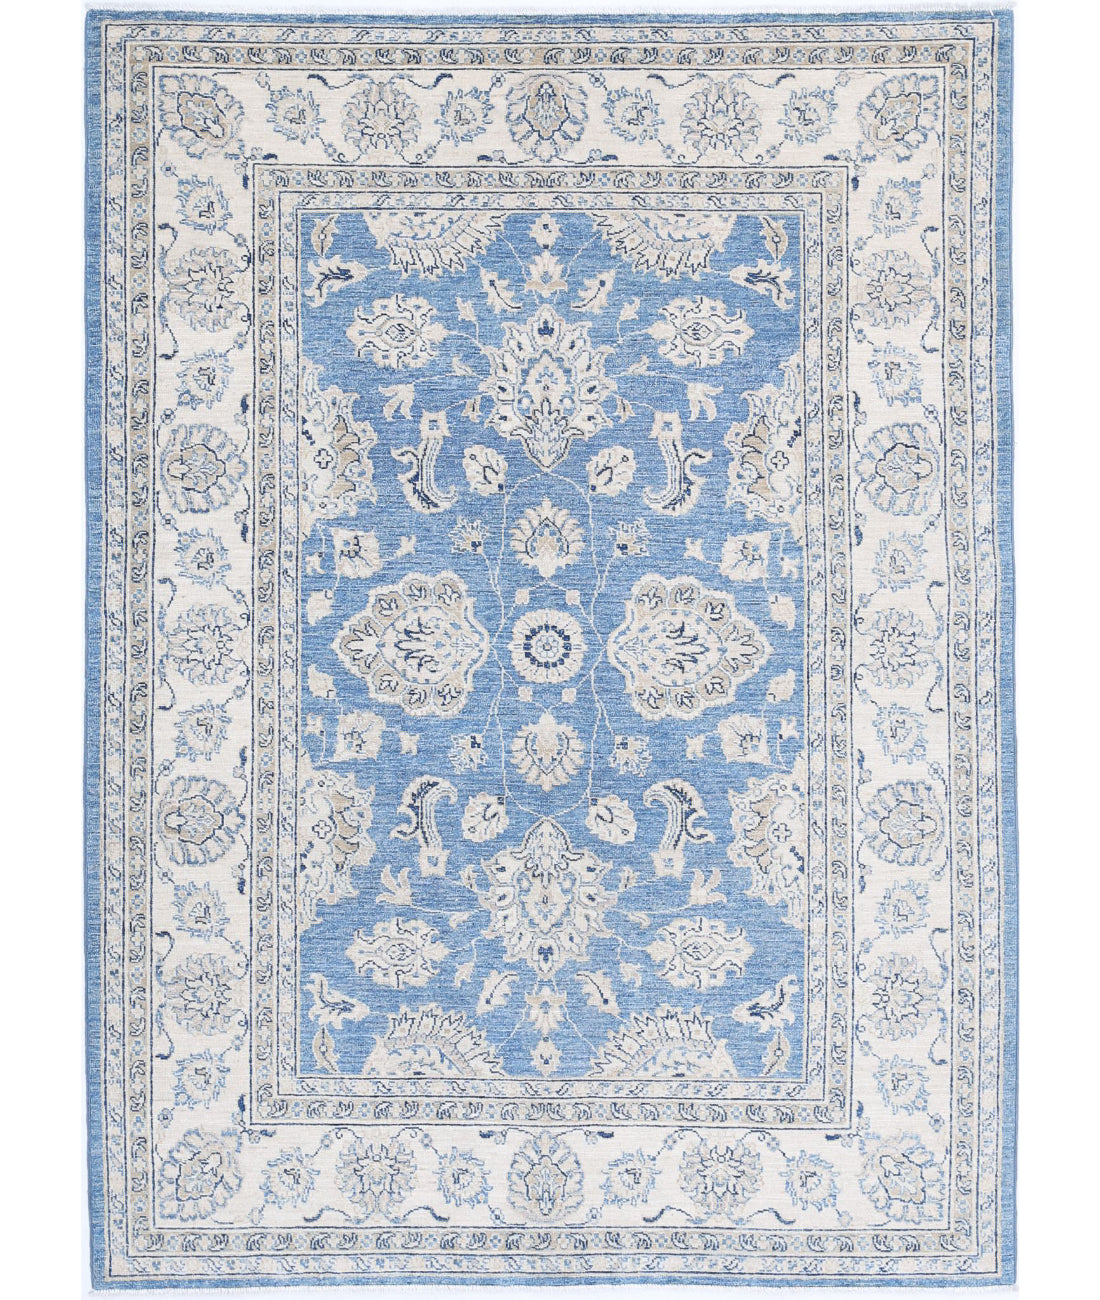 Hand Knotted Serenity Wool Rug - 4'9'' x 6'9'' 4'9'' x 6'9'' (143 X 203) / Blue / Ivory